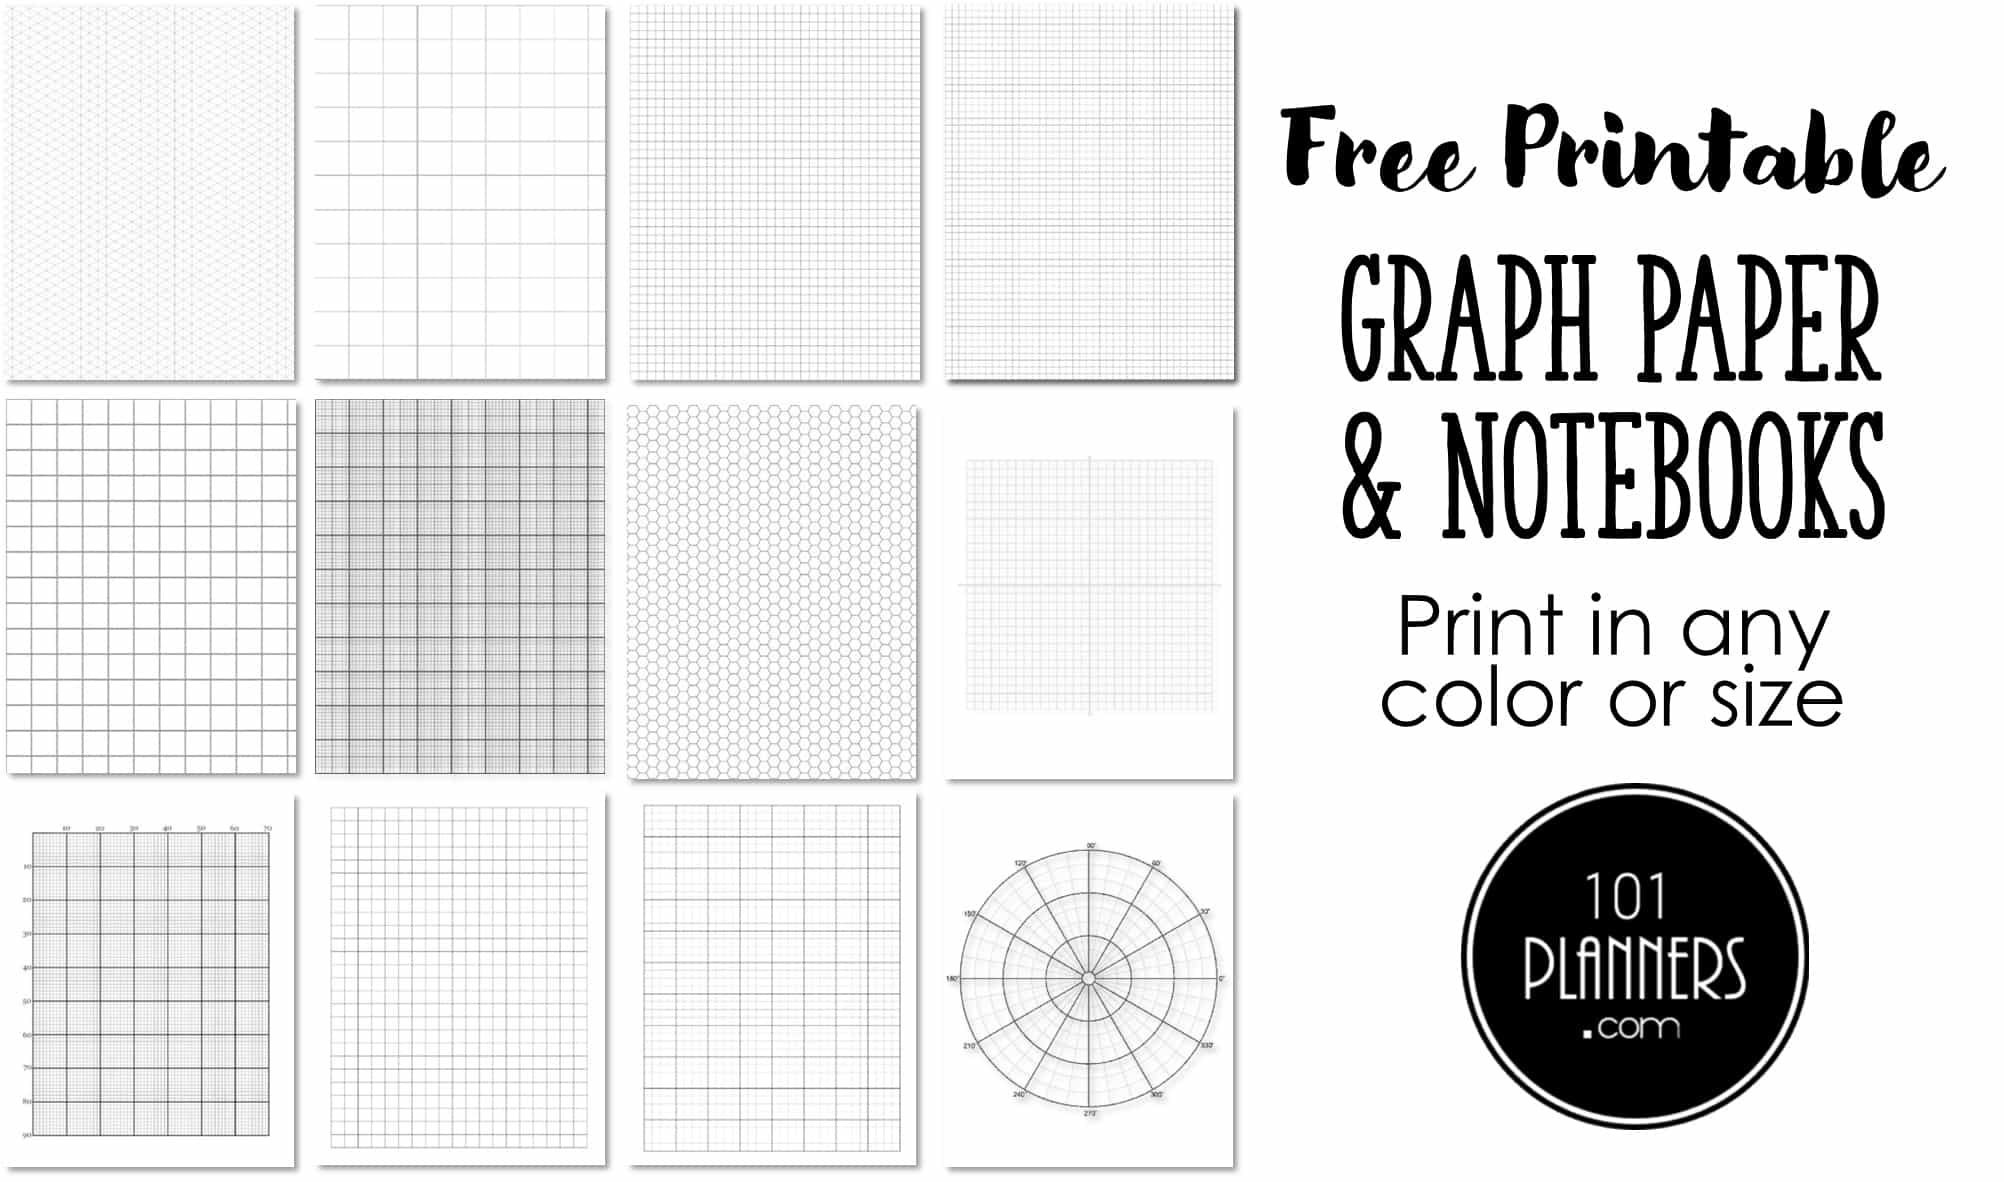 Free Printable Graph Paper 1 Inch